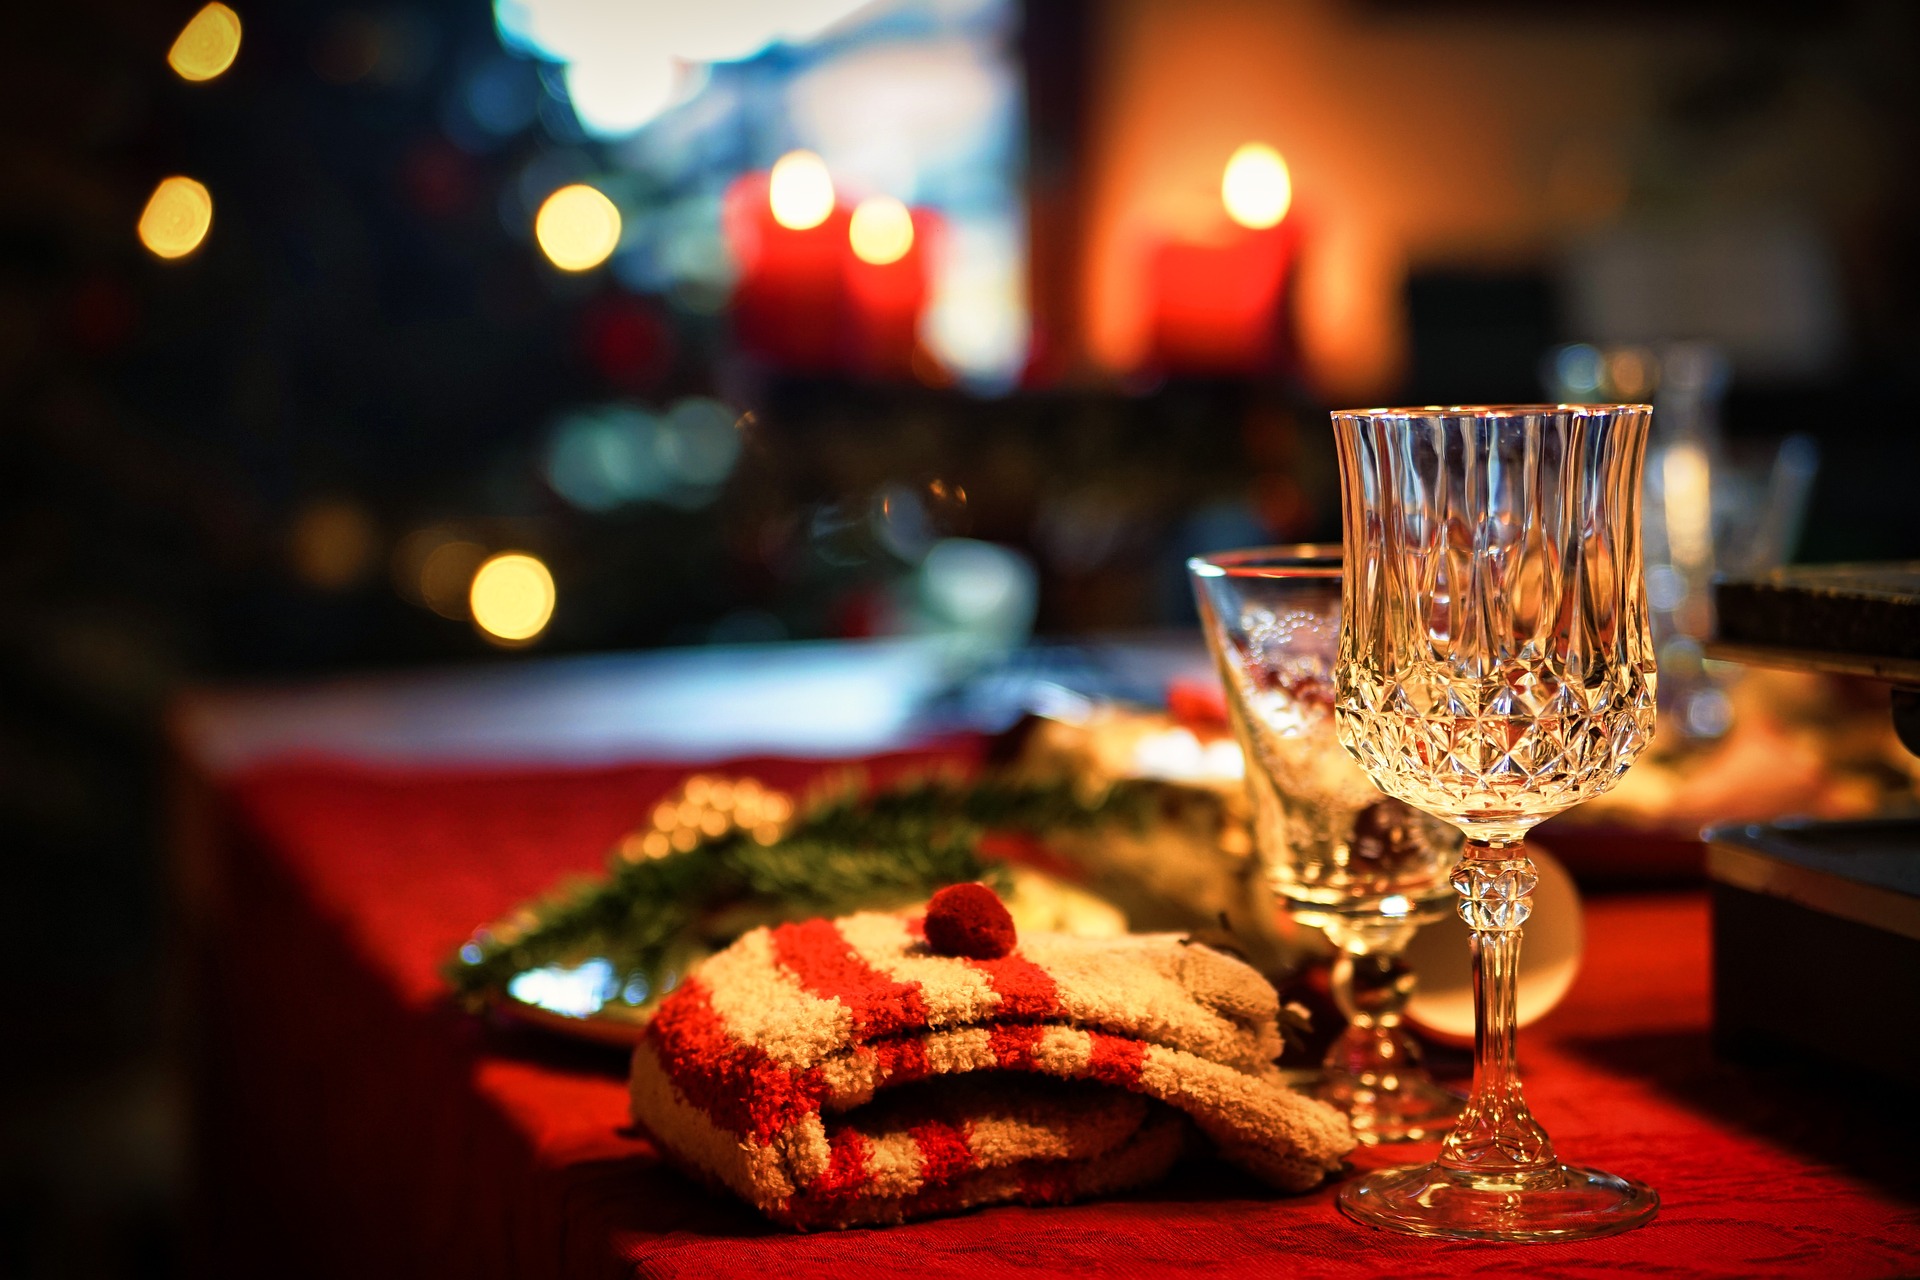 A table set for Christmas, with plates, wine glasses, a Christmas tree and candles in the background, with Christmas-themed socks and other presents around; our No Win No Fee Solicitors discuss food allergies at Christmas and how to stay safe.